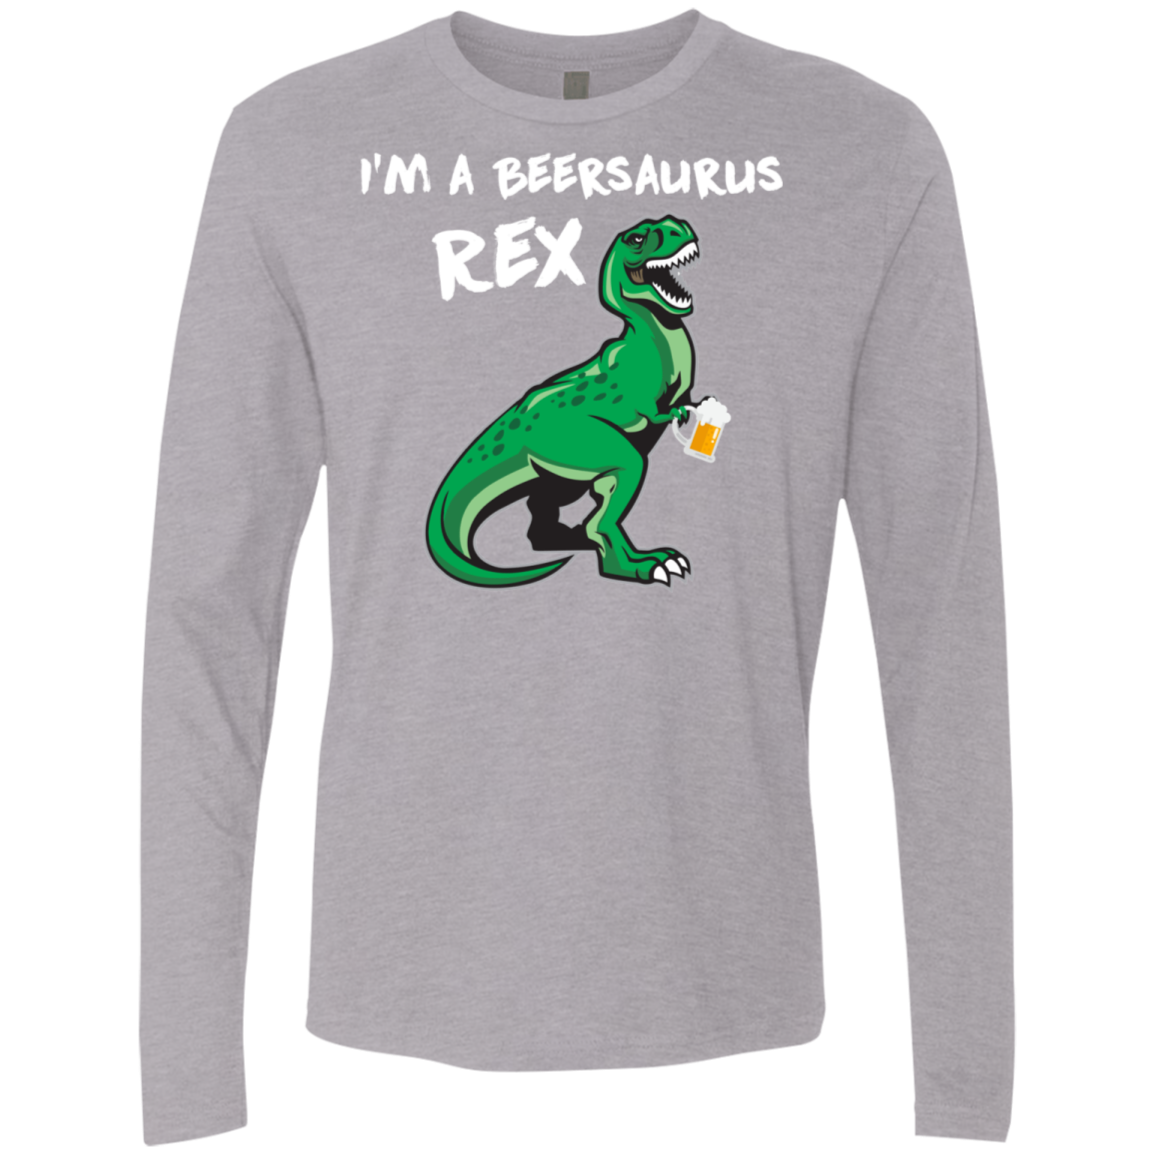 I'm A Beersaurus Rex T-Shirt Apparel - The Beer Lodge